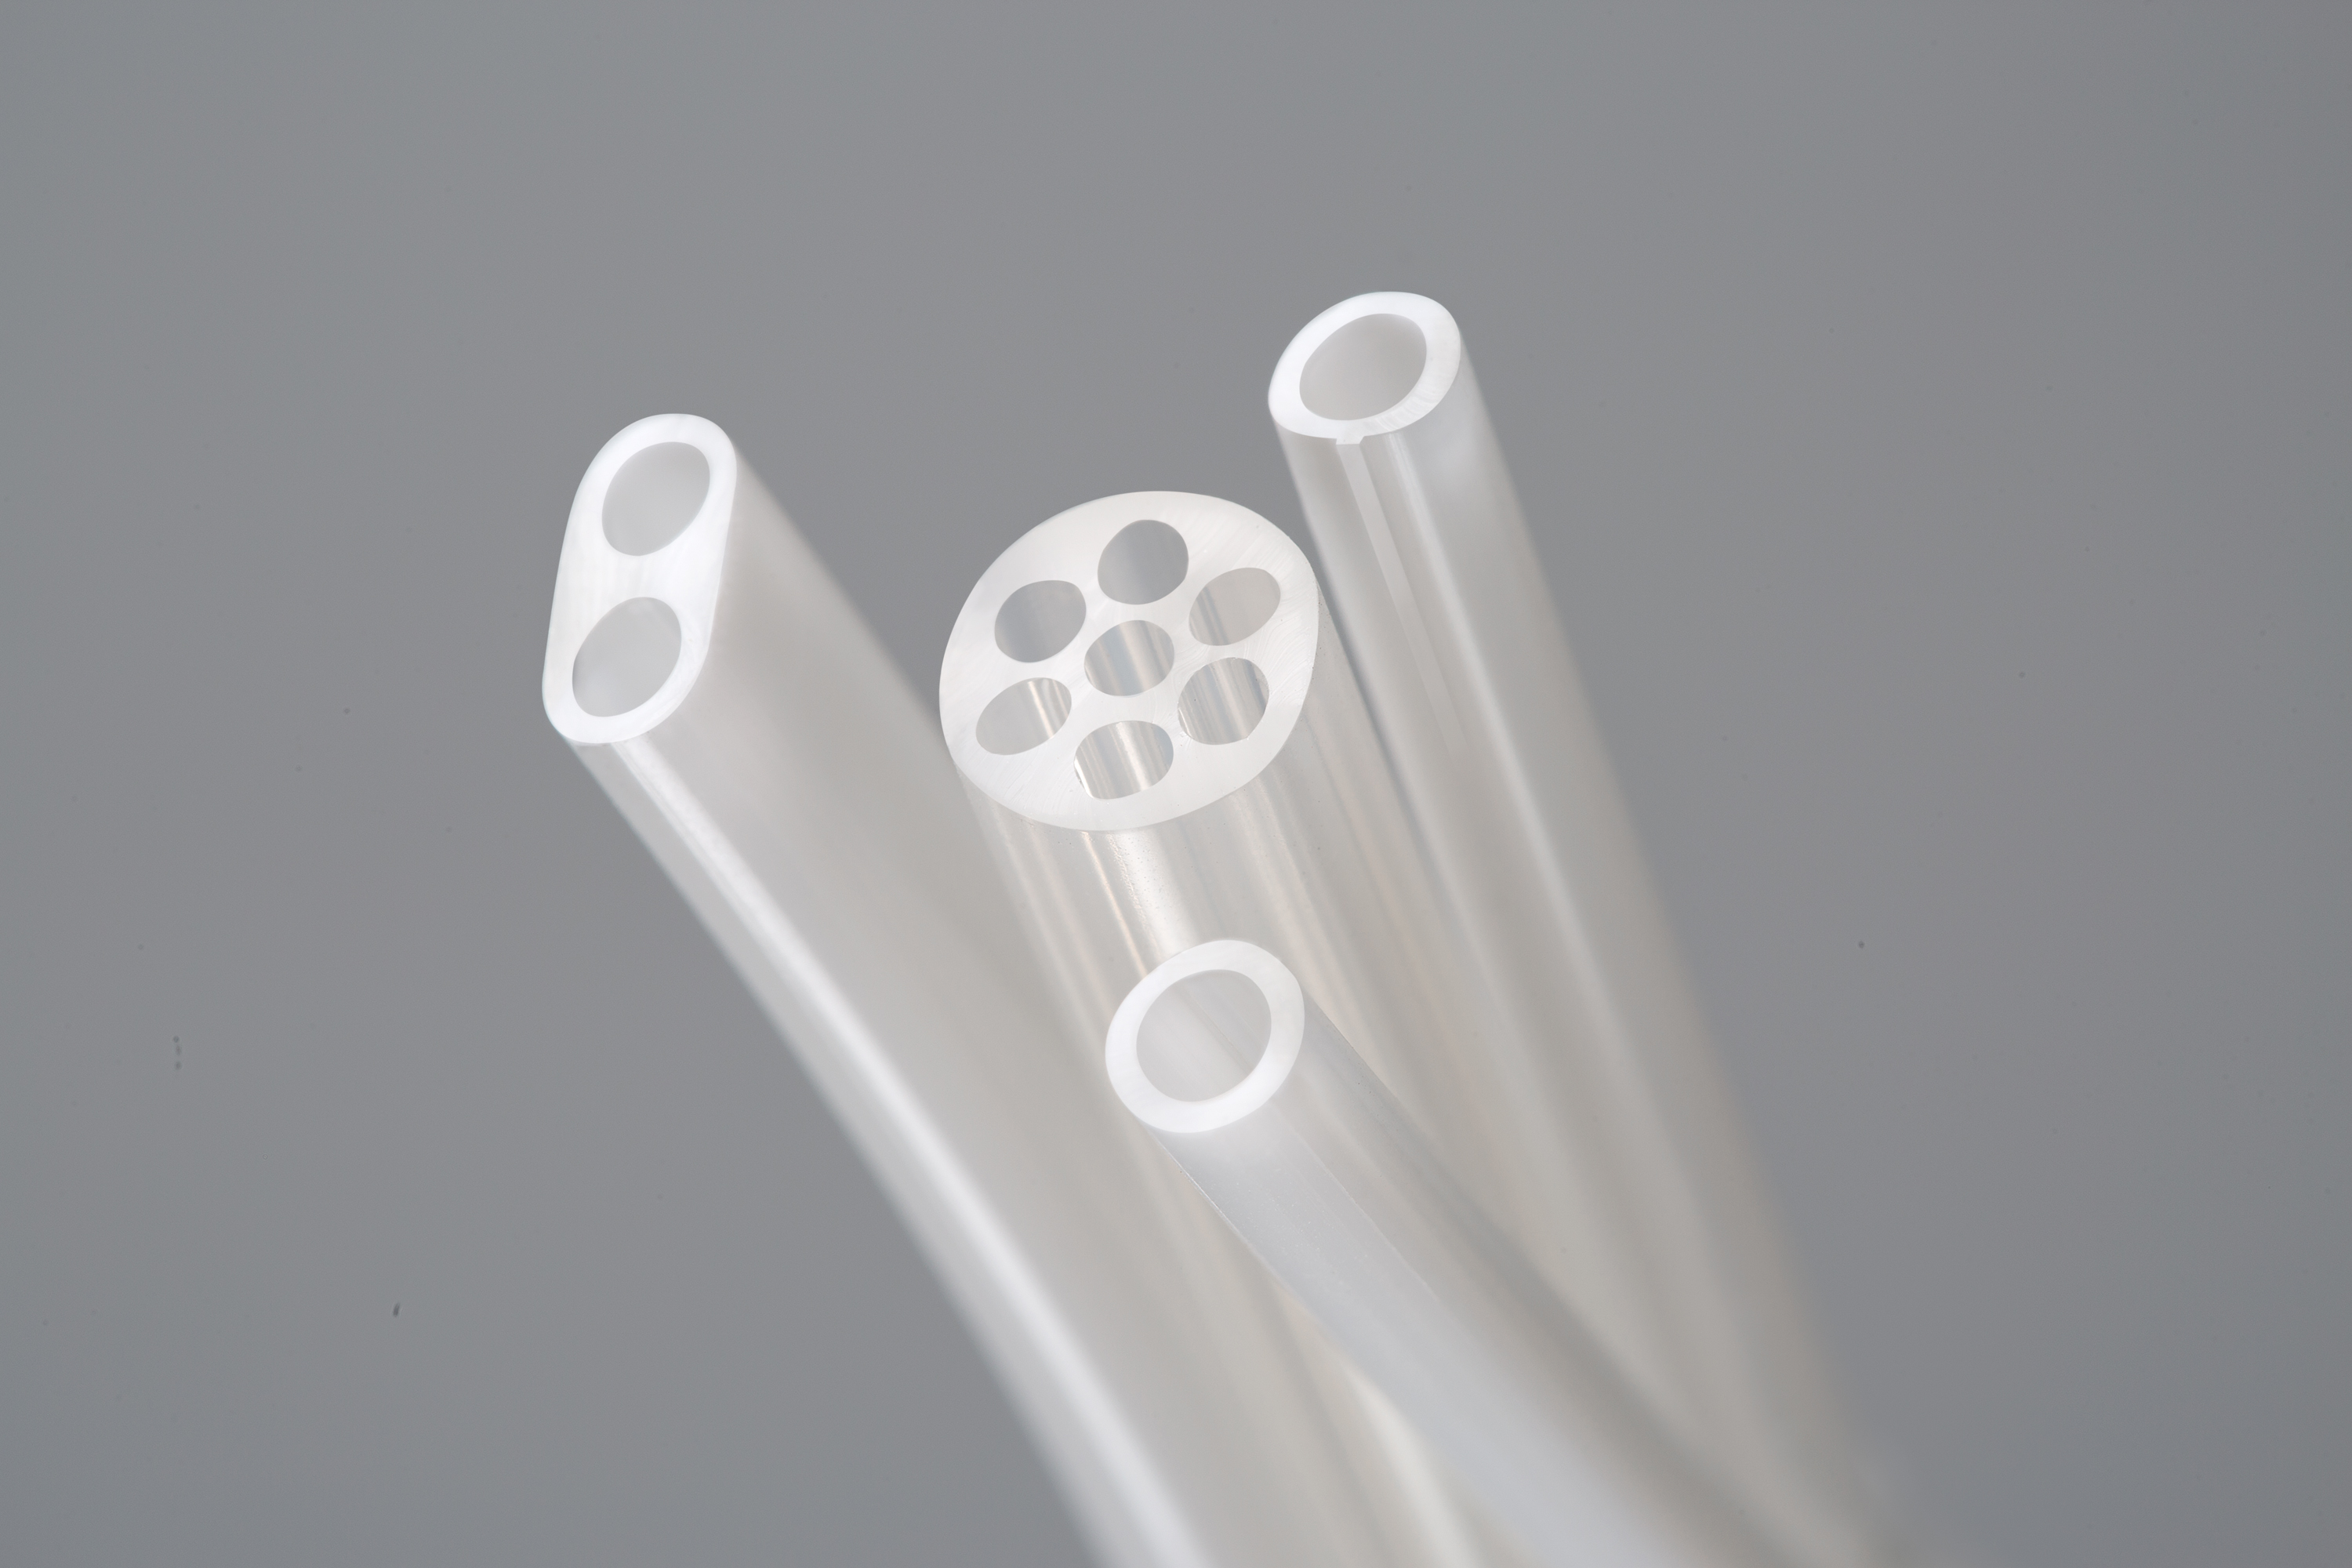 Medical and food grade silicone tubing and hose that meet U.S. Pharmacopeia (USP) Class VI standards